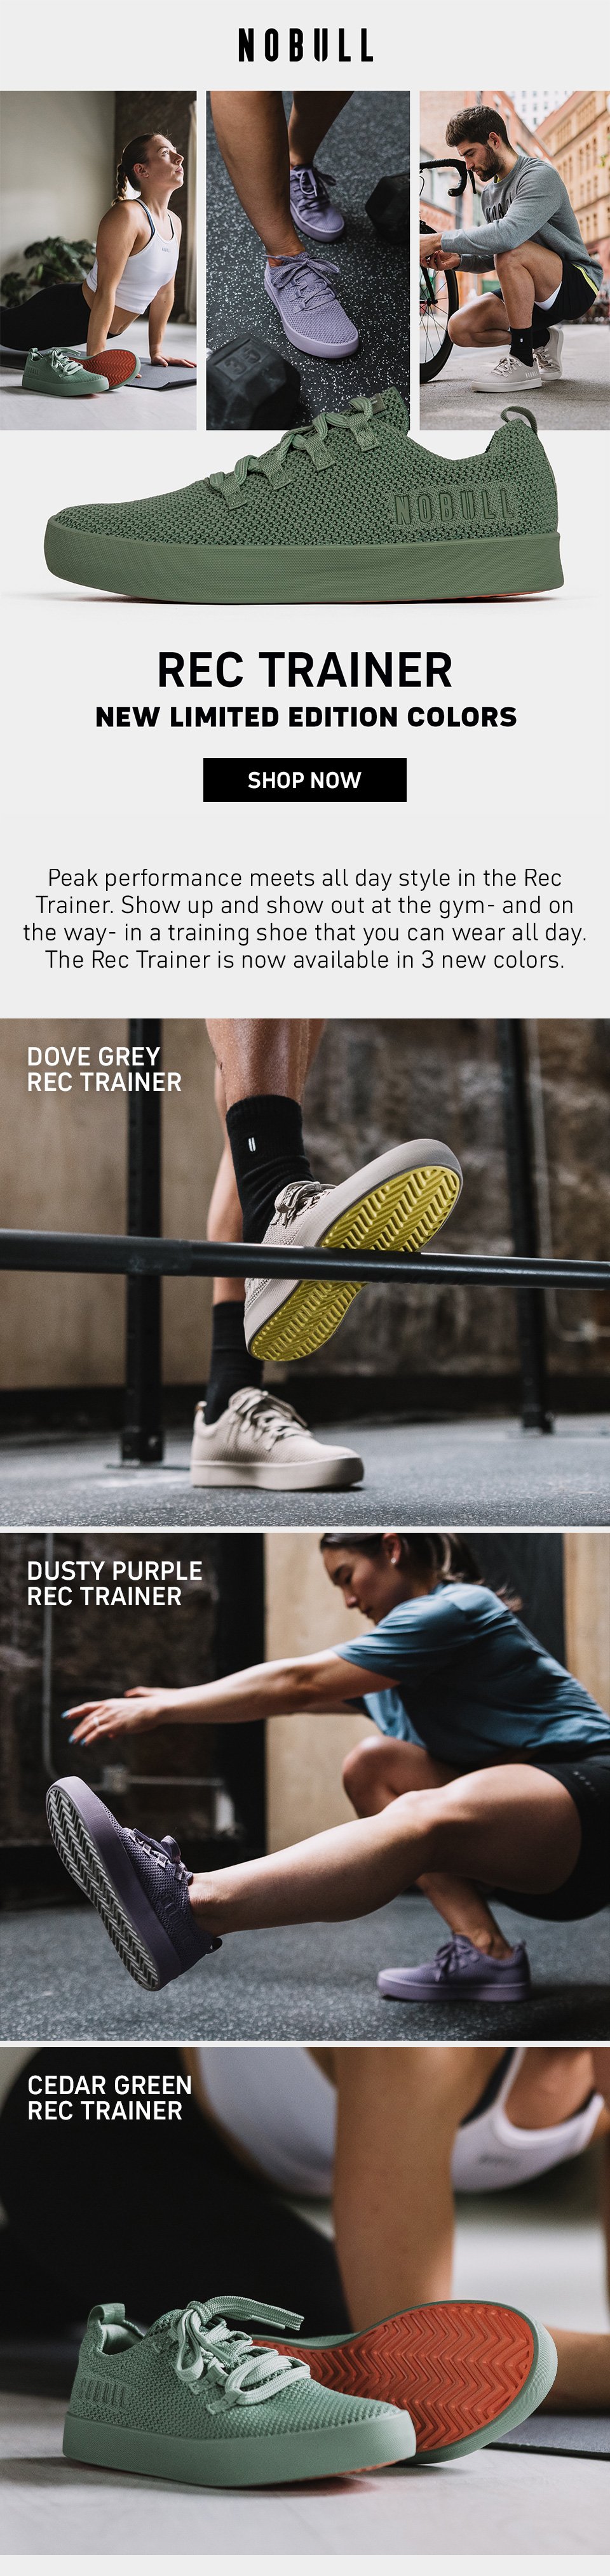 NEW Rec Trainer Colors are here! 🟩Cedar Green 🟪Dusty Purple ⬜️Dove Grey  Now available in new colors that let you be you, no ma